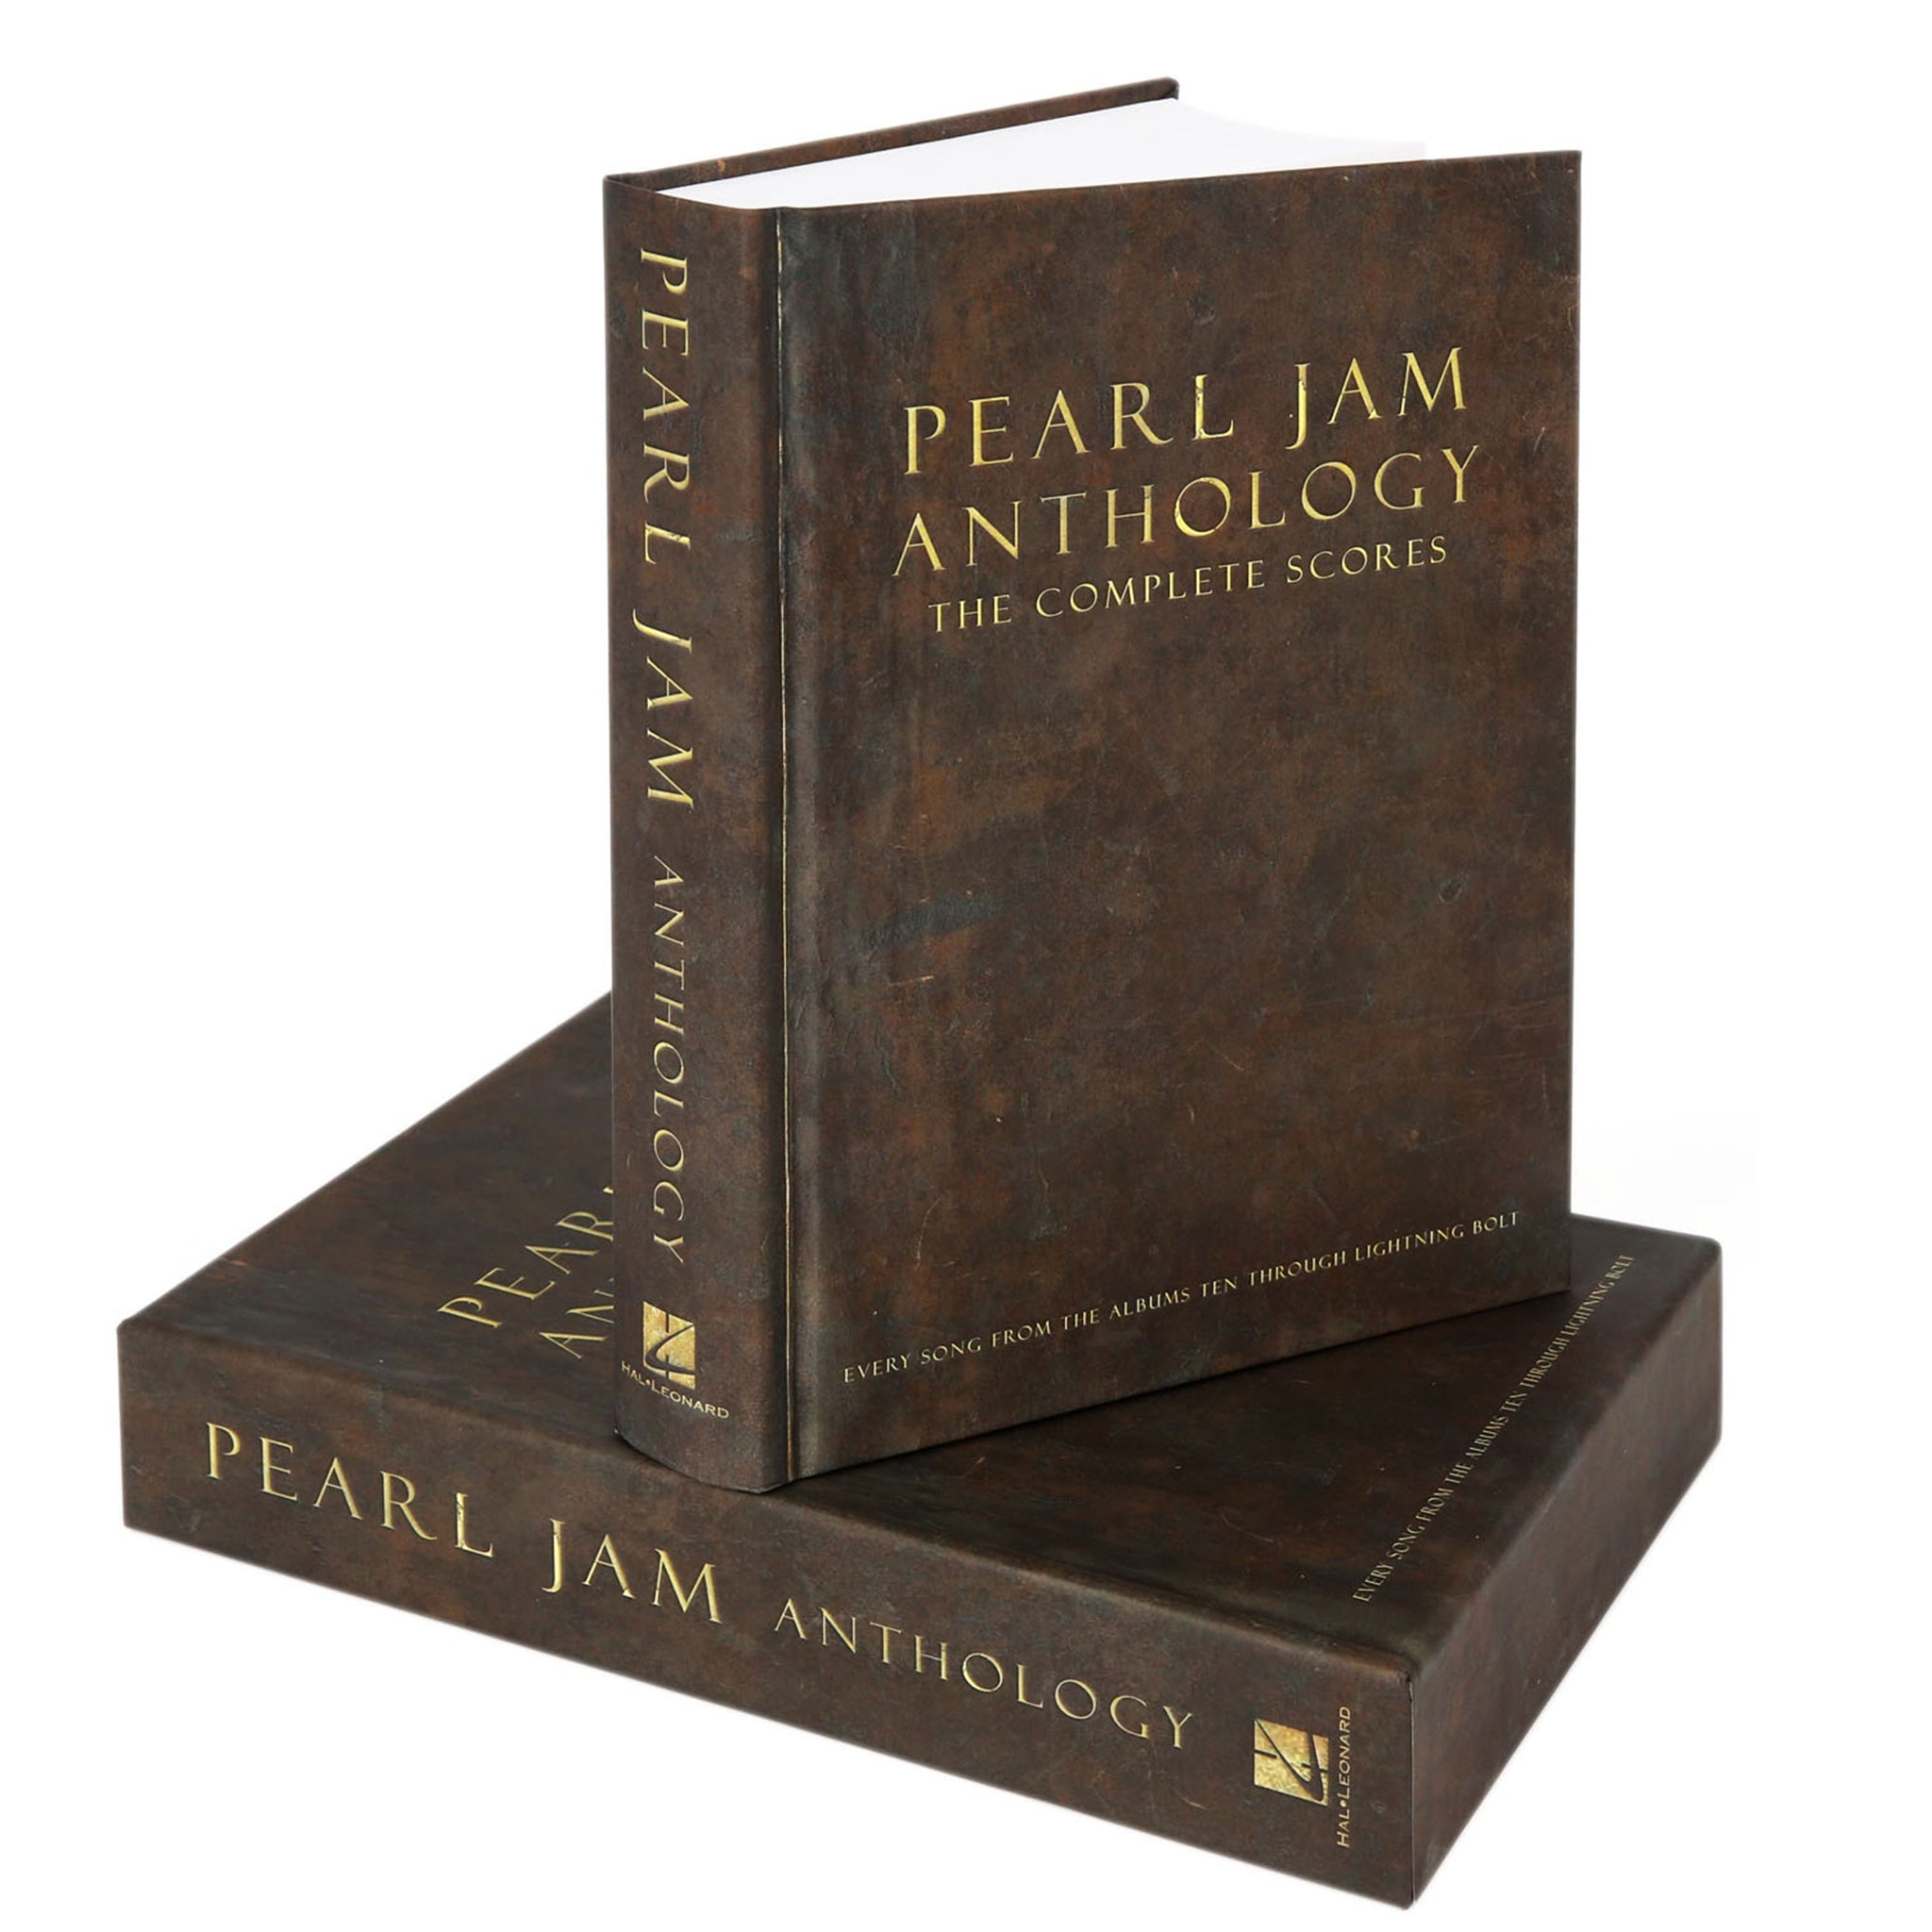 PEARL JAM ANTHOLOGY - THE COMPLETE SCORES